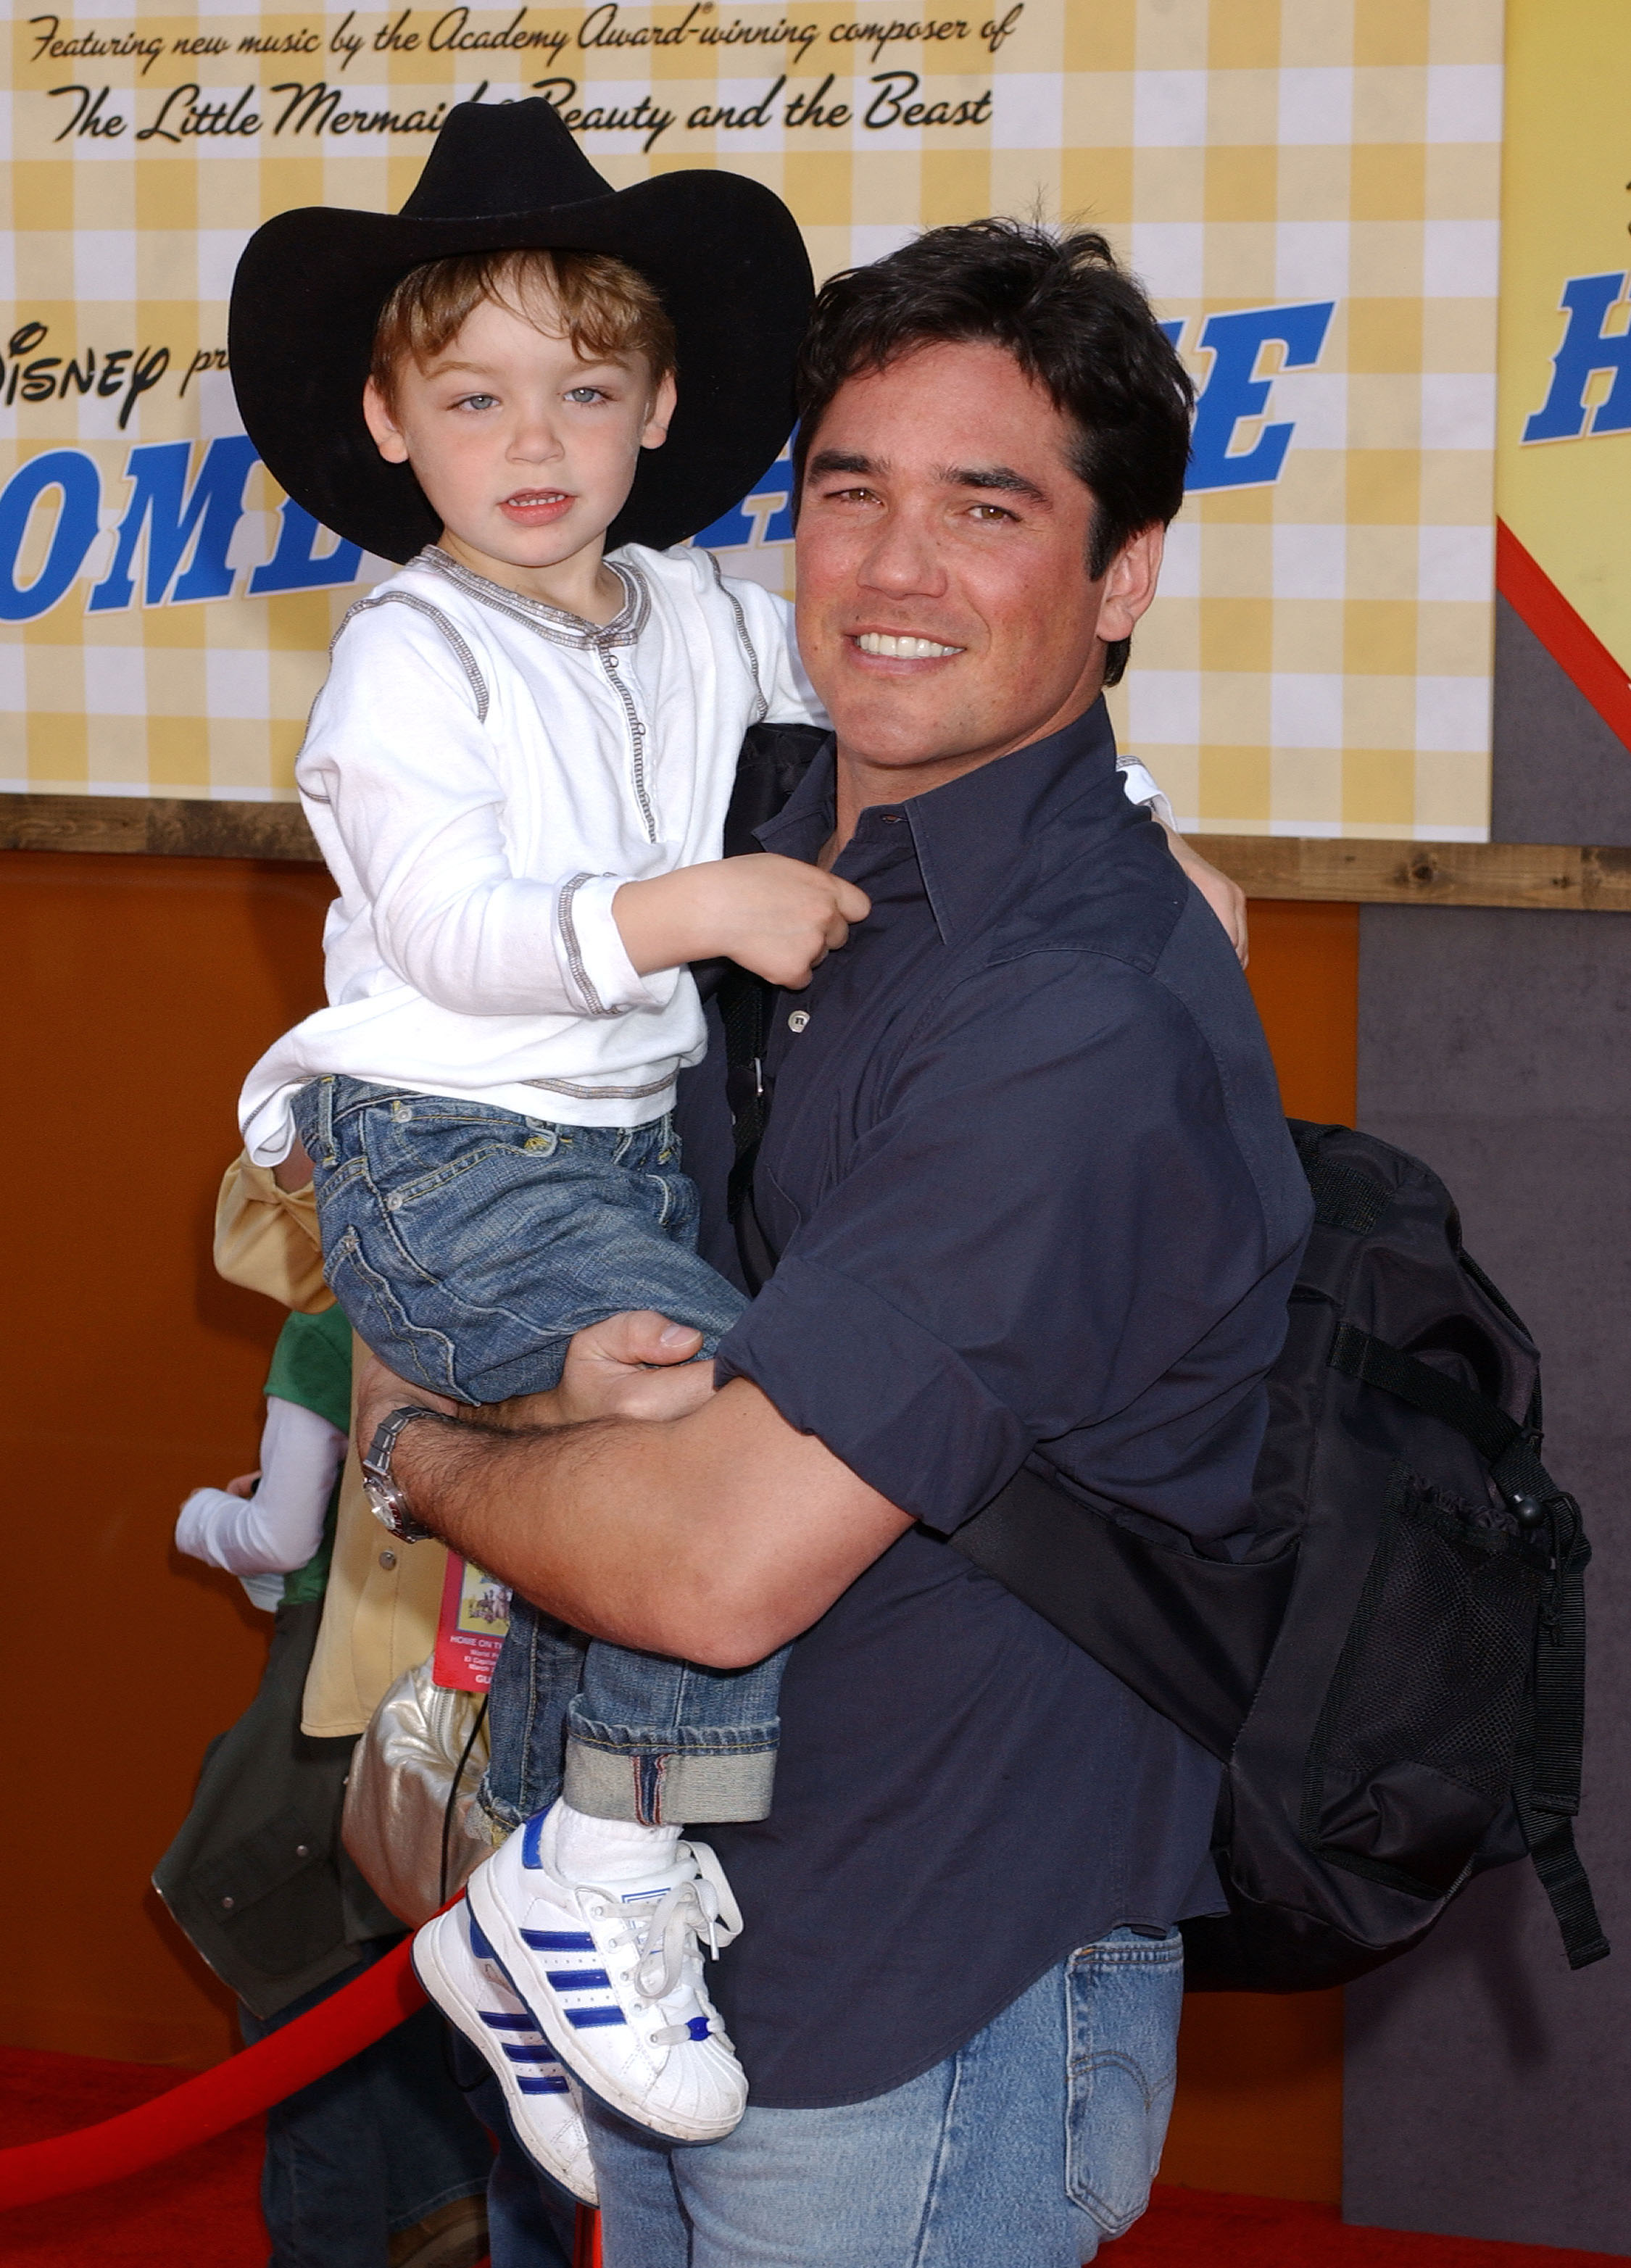 Christopher Cain and Dean Cain at the premiere of "Home on the Range," 2004 | Source: Getty Images